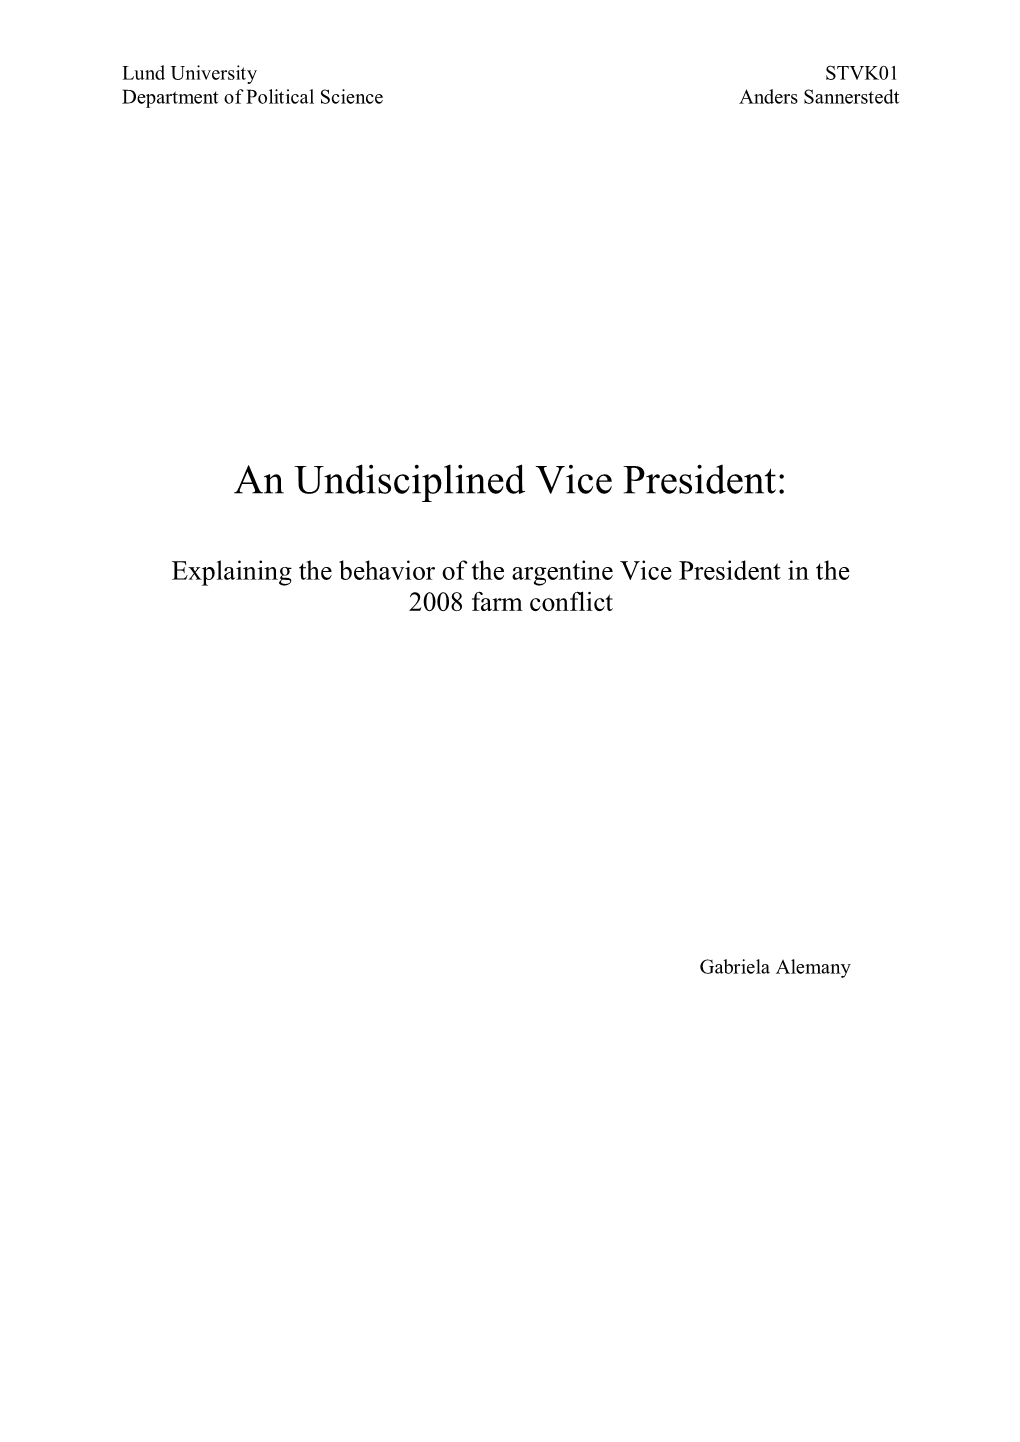 An Undisciplined Vice President